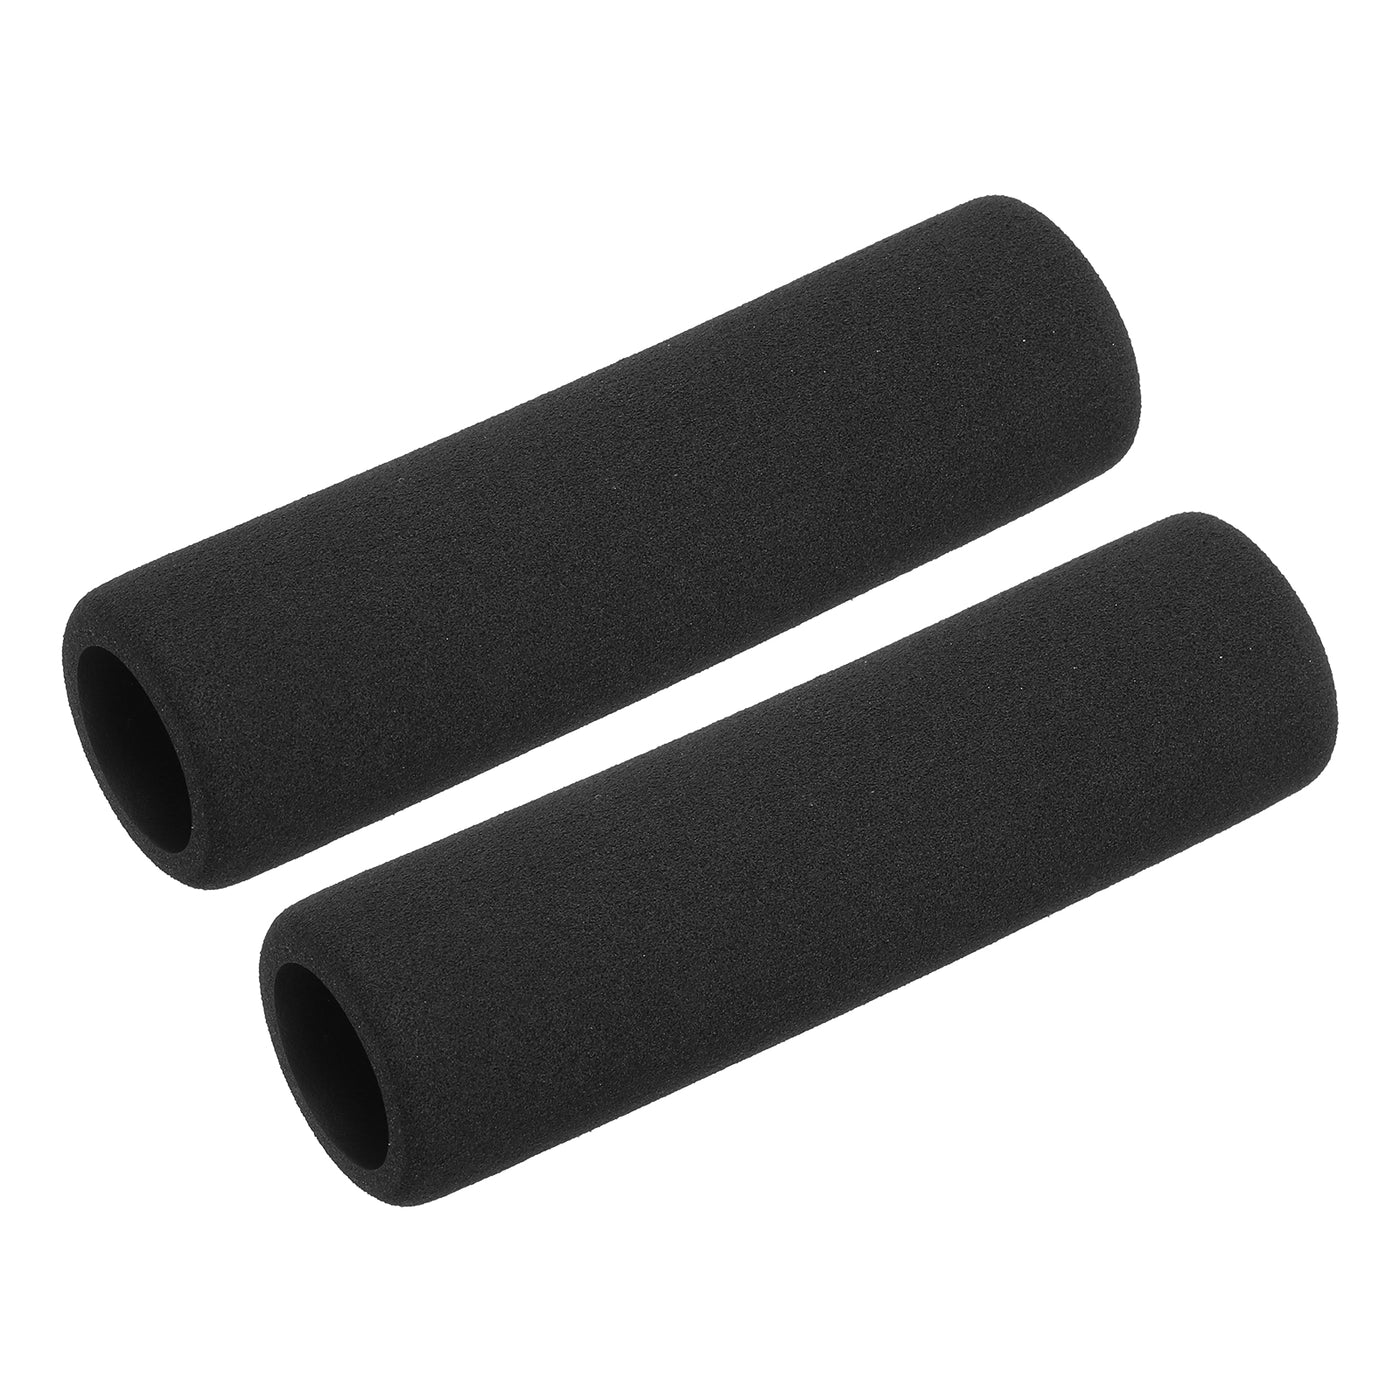 uxcell Uxcell Pipe Insulation Tube Foam Tubing for Handle Grip Support 21mm ID 31mm OD 118mm Heat Preservation Black 2pcs